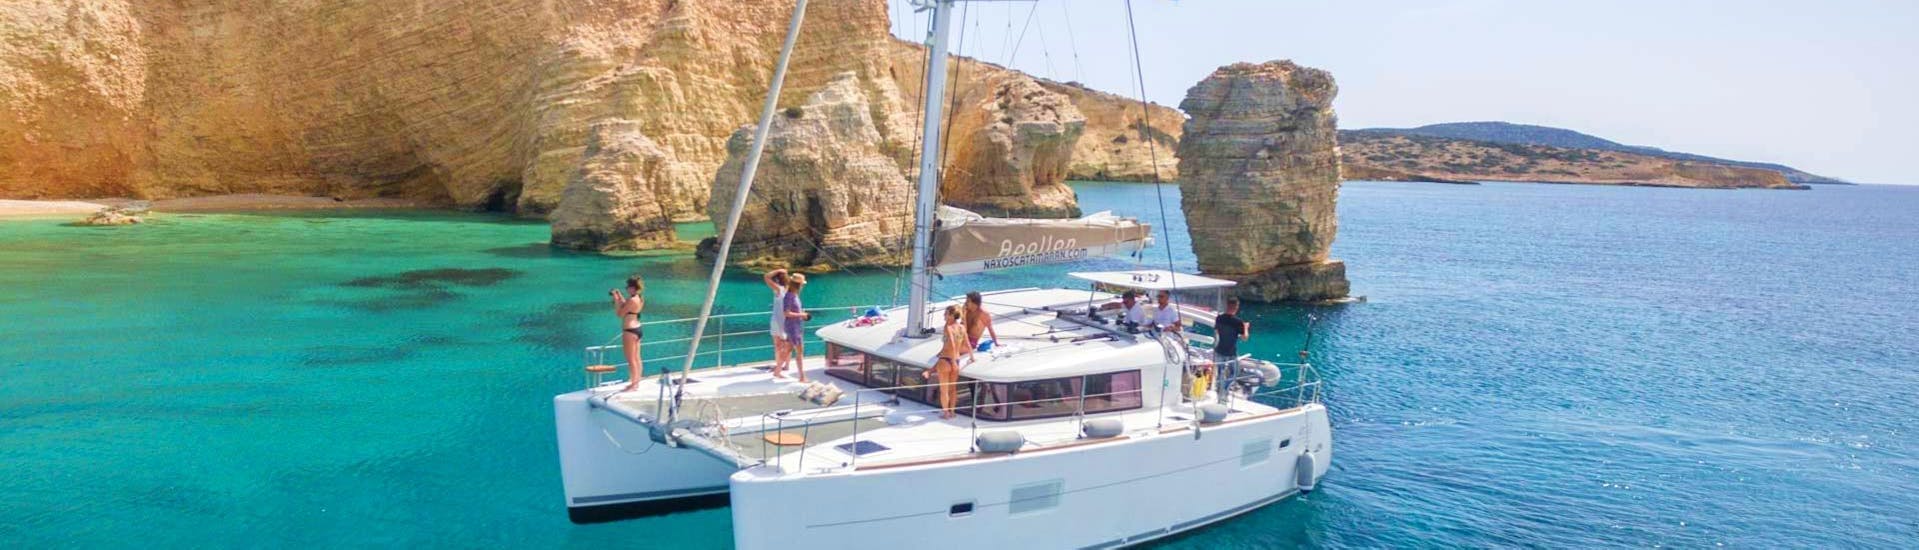 During the Full-Day Sailing Cruise on a Luxury Catamaran from Naxos, the catamaran Apollon from Naxos Catamaran is sailing along the beautiful coast of Paros.